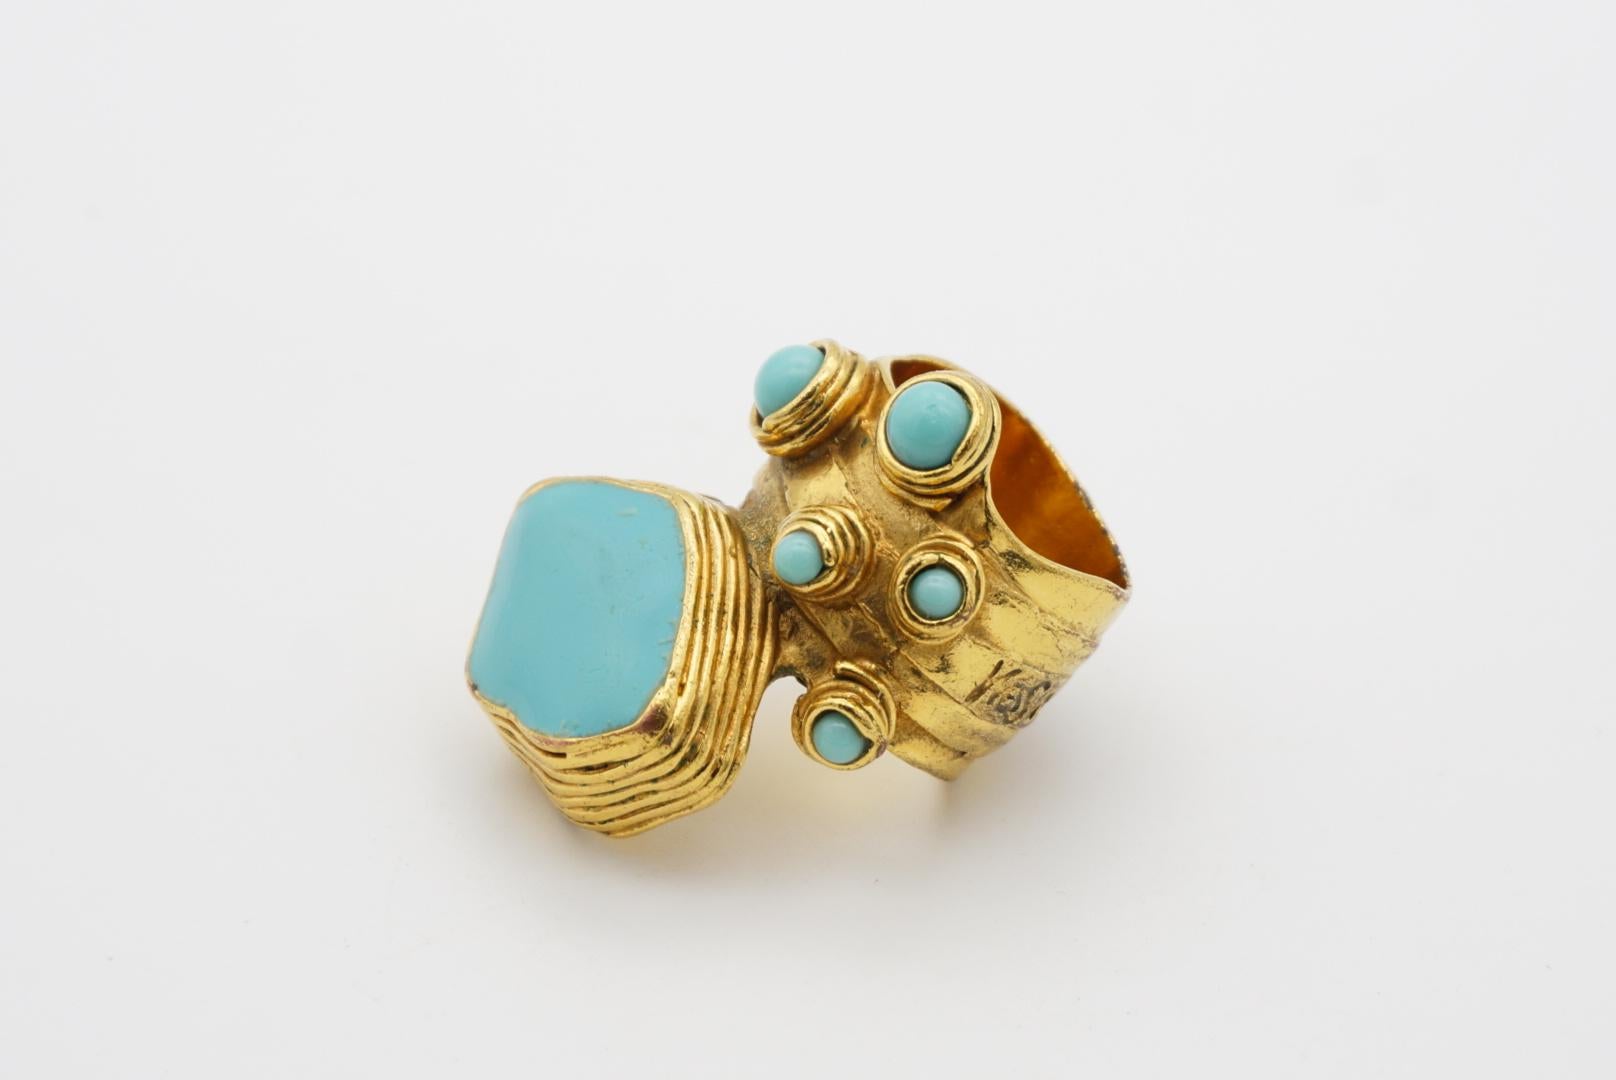 Yves Saint Laurent YSL Arty Turquoise Cabochon Dots Chunky Gold Ring, Size 7 In Good Condition For Sale In Wokingham, England